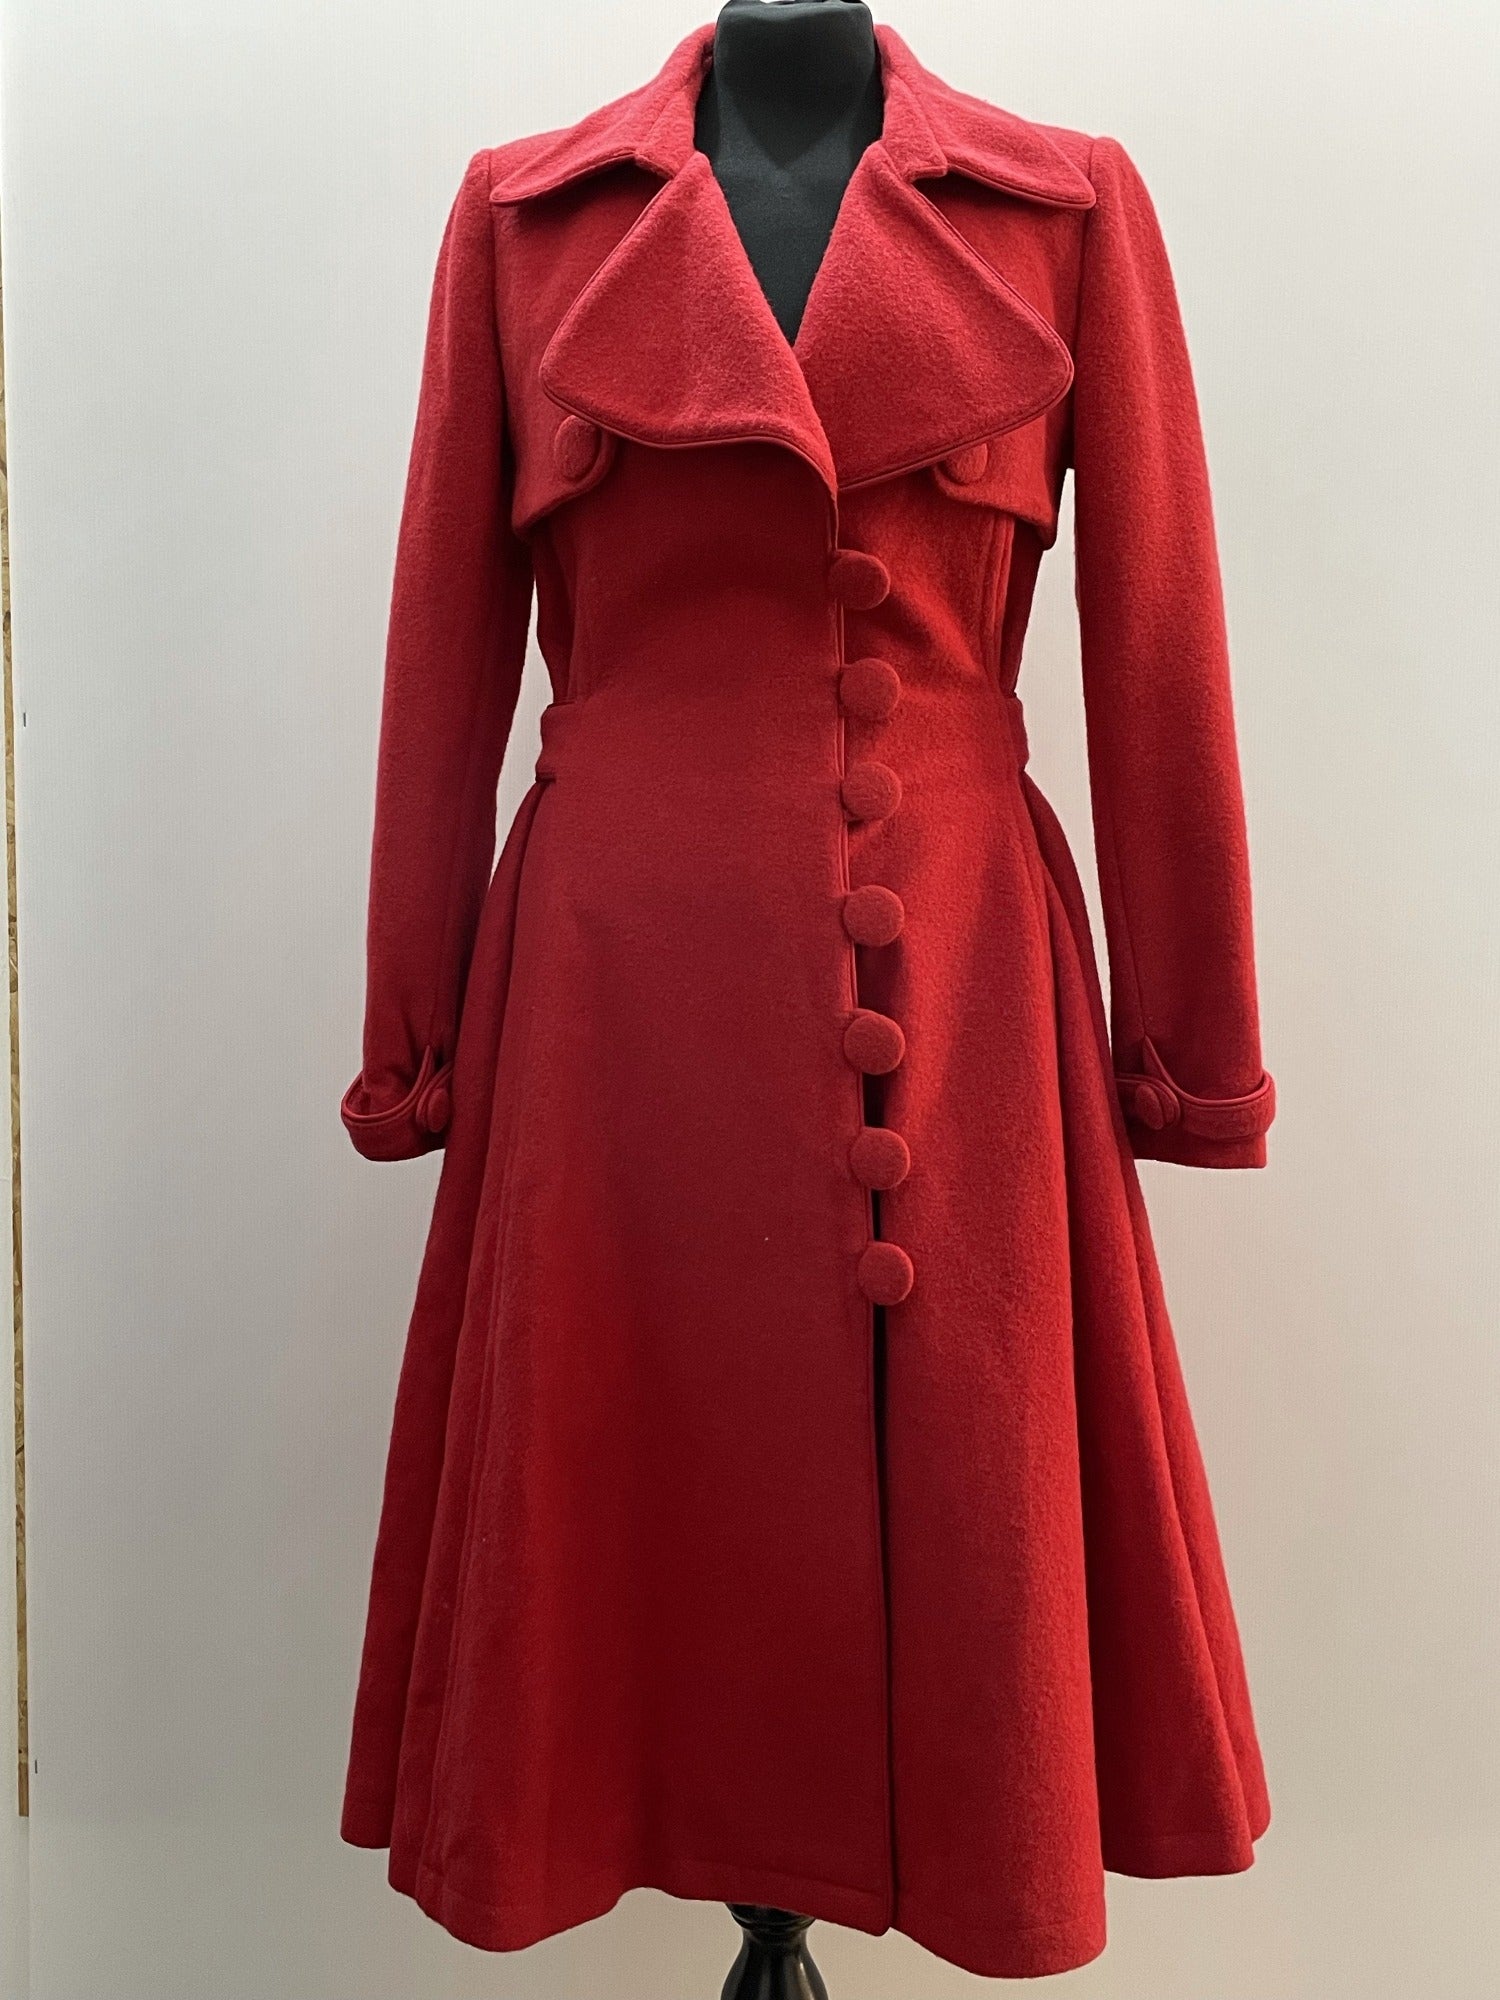 coat  wool coat  wool  vintage coat  vintage  retro  red  princess coat  princess  fitted coat  fit and flare  festive  christmas  8  70s  1970s